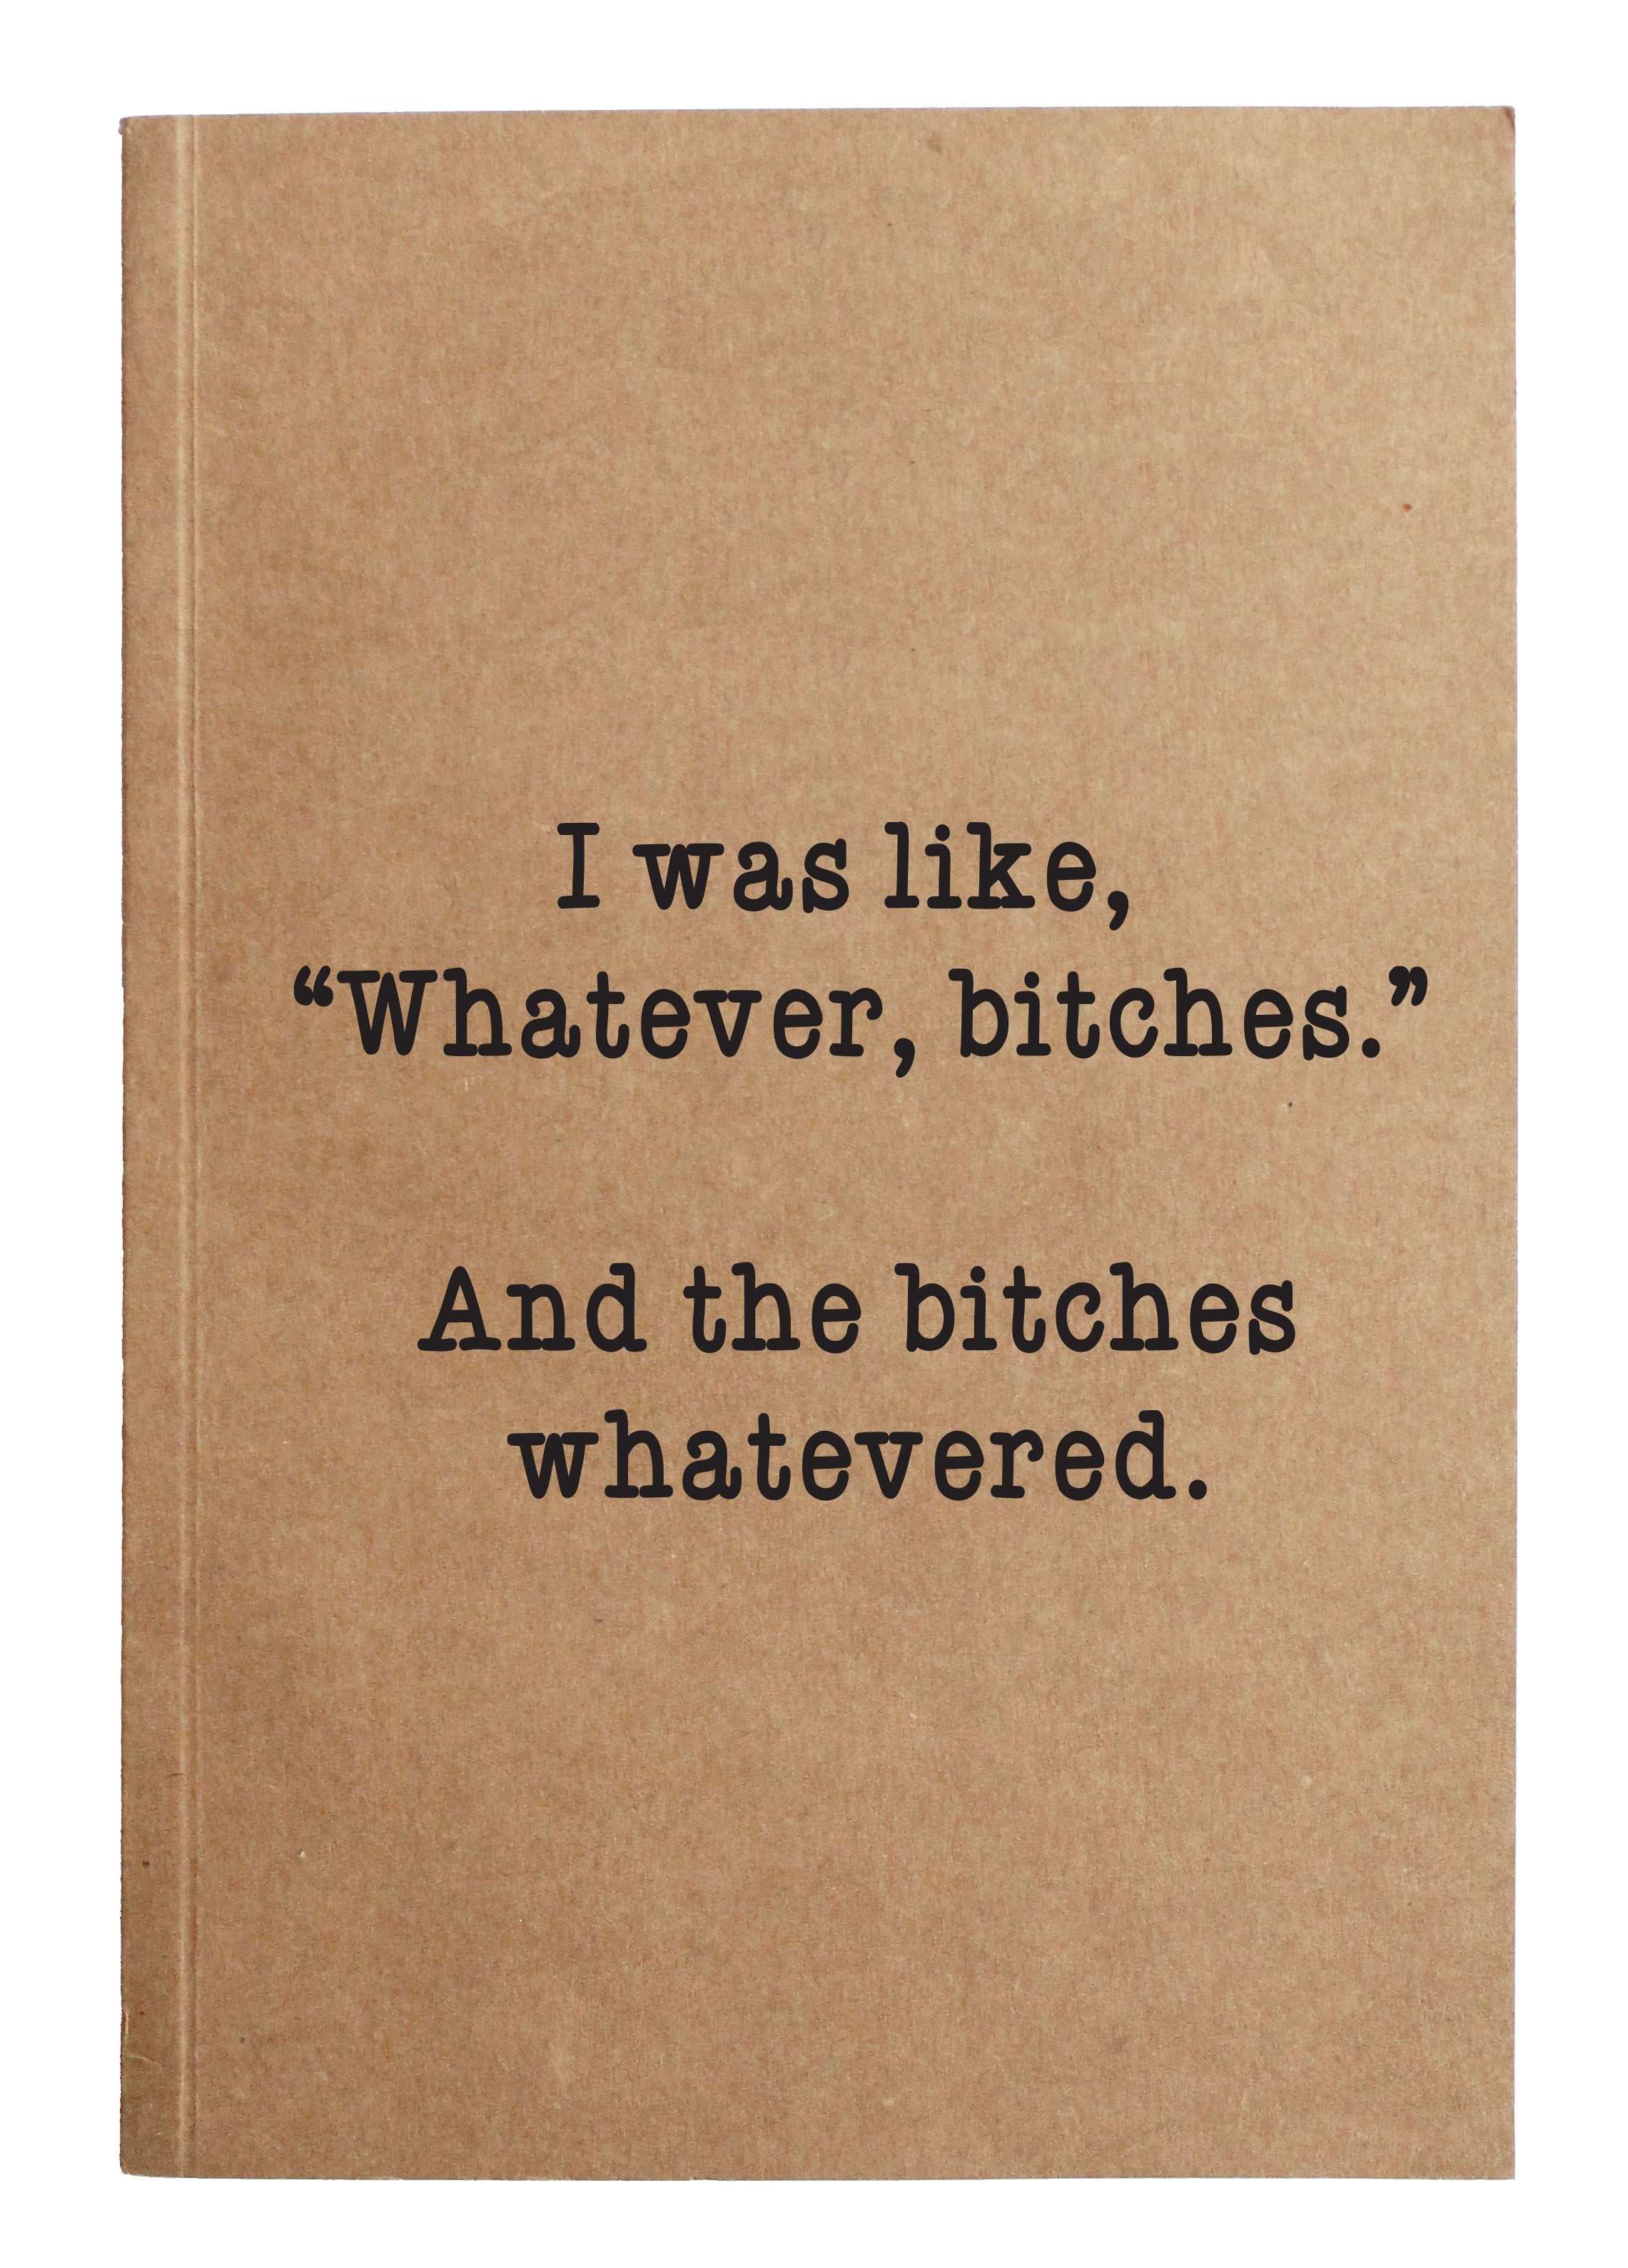 I was like "Whatever, bitches."  And the bitches whatevered. kraft notebook